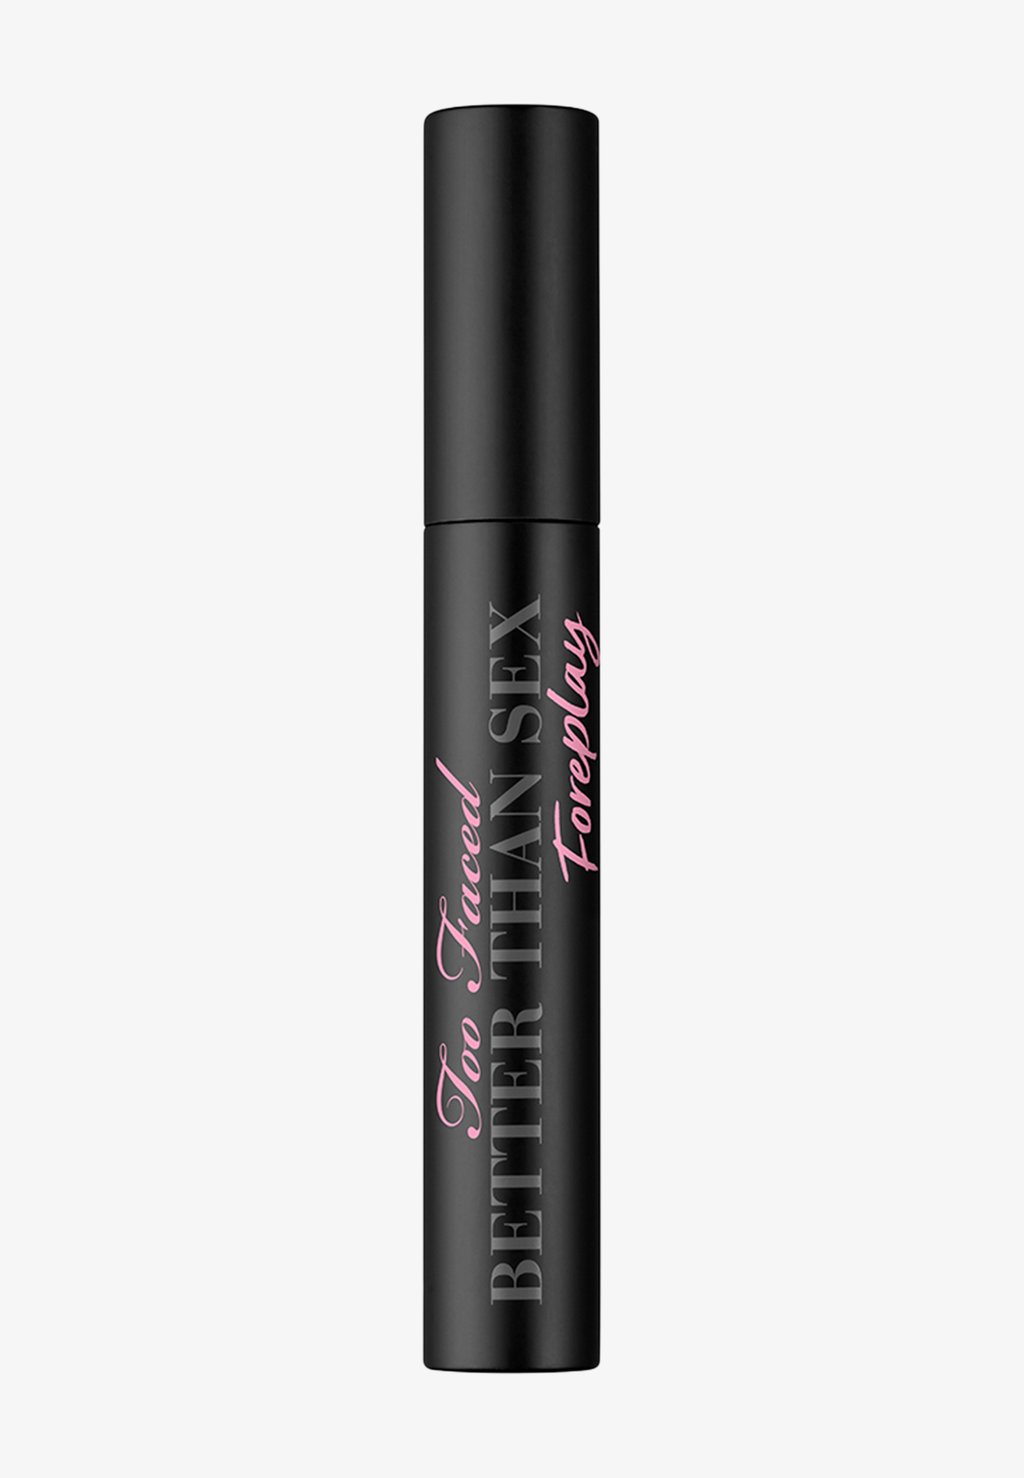 Праймер BETTER THAN SEX FOREPLAY LASH PRIMER Too Faced